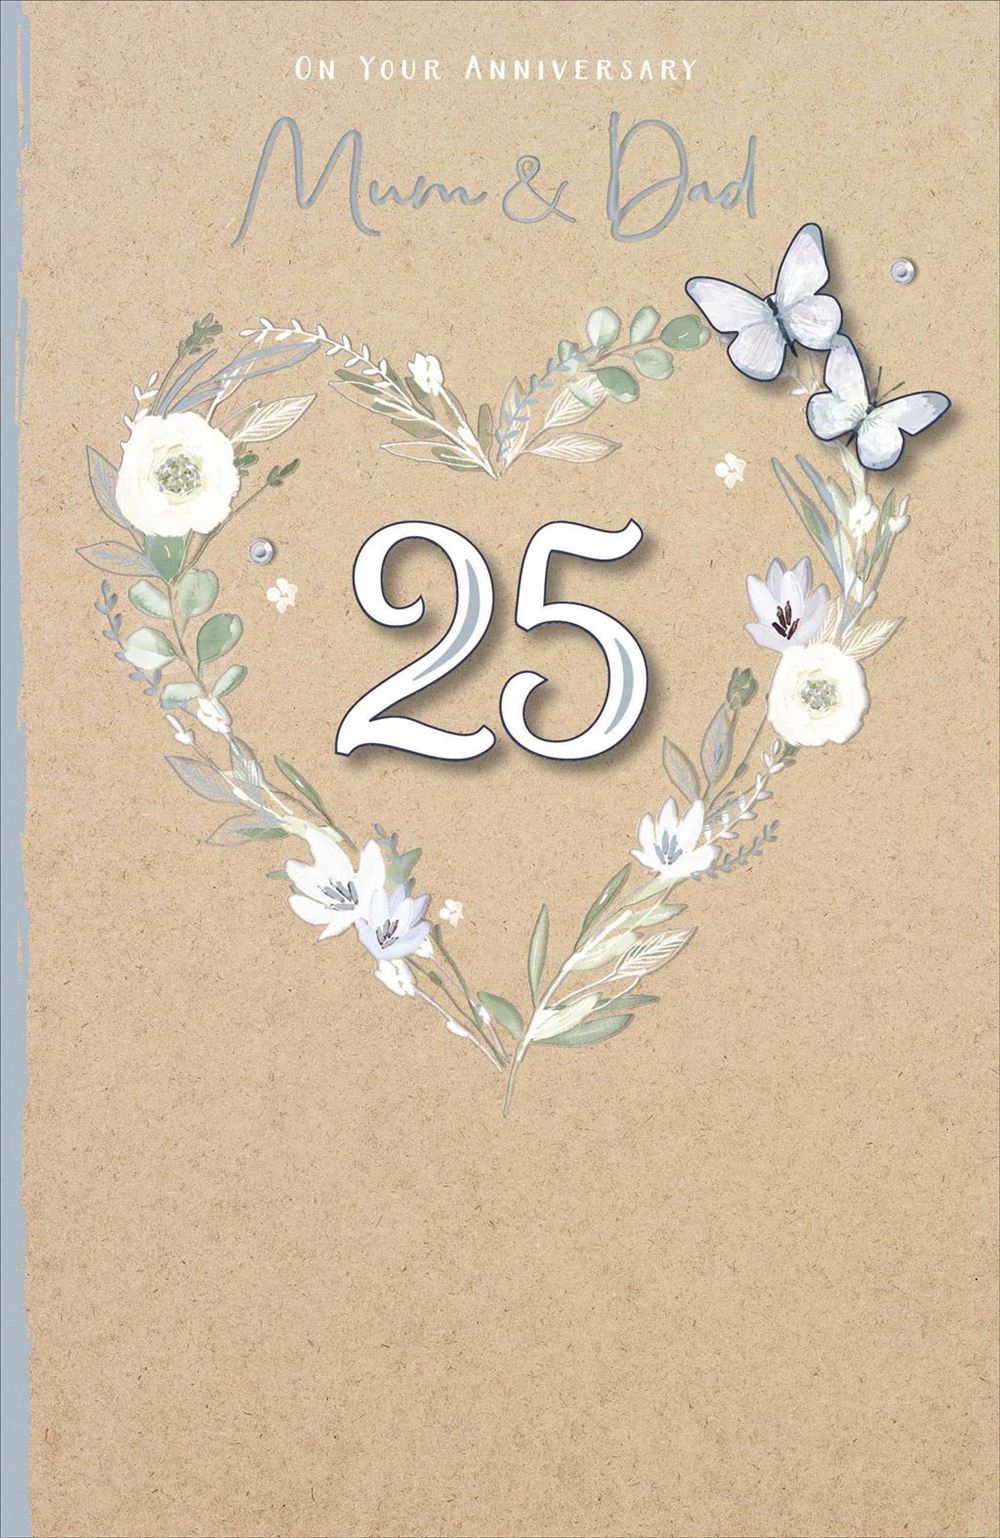 Mum and Dad 25th Anniversary Card - Floral Heart And Butterflies 